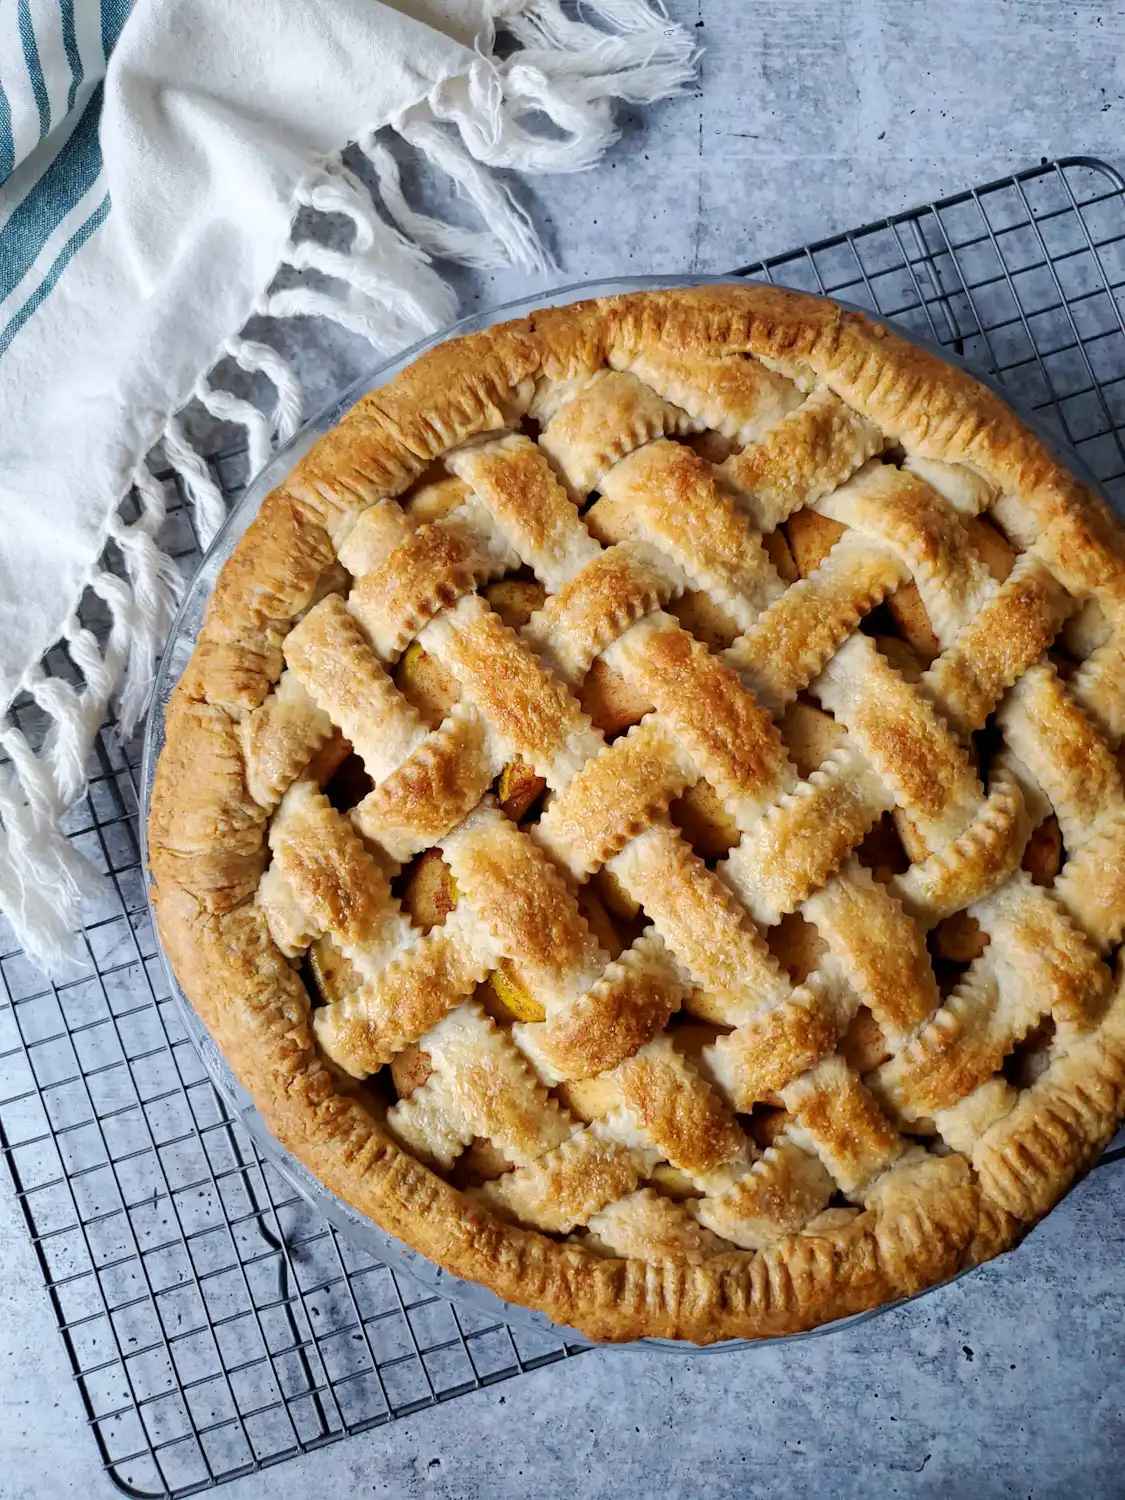 An apple pie with a latticed crust has just finished baking. The crust is golden brown and the space between the lattice pieces reveal apples below. Use this sourdough discard recipe for a delicious pie crust.